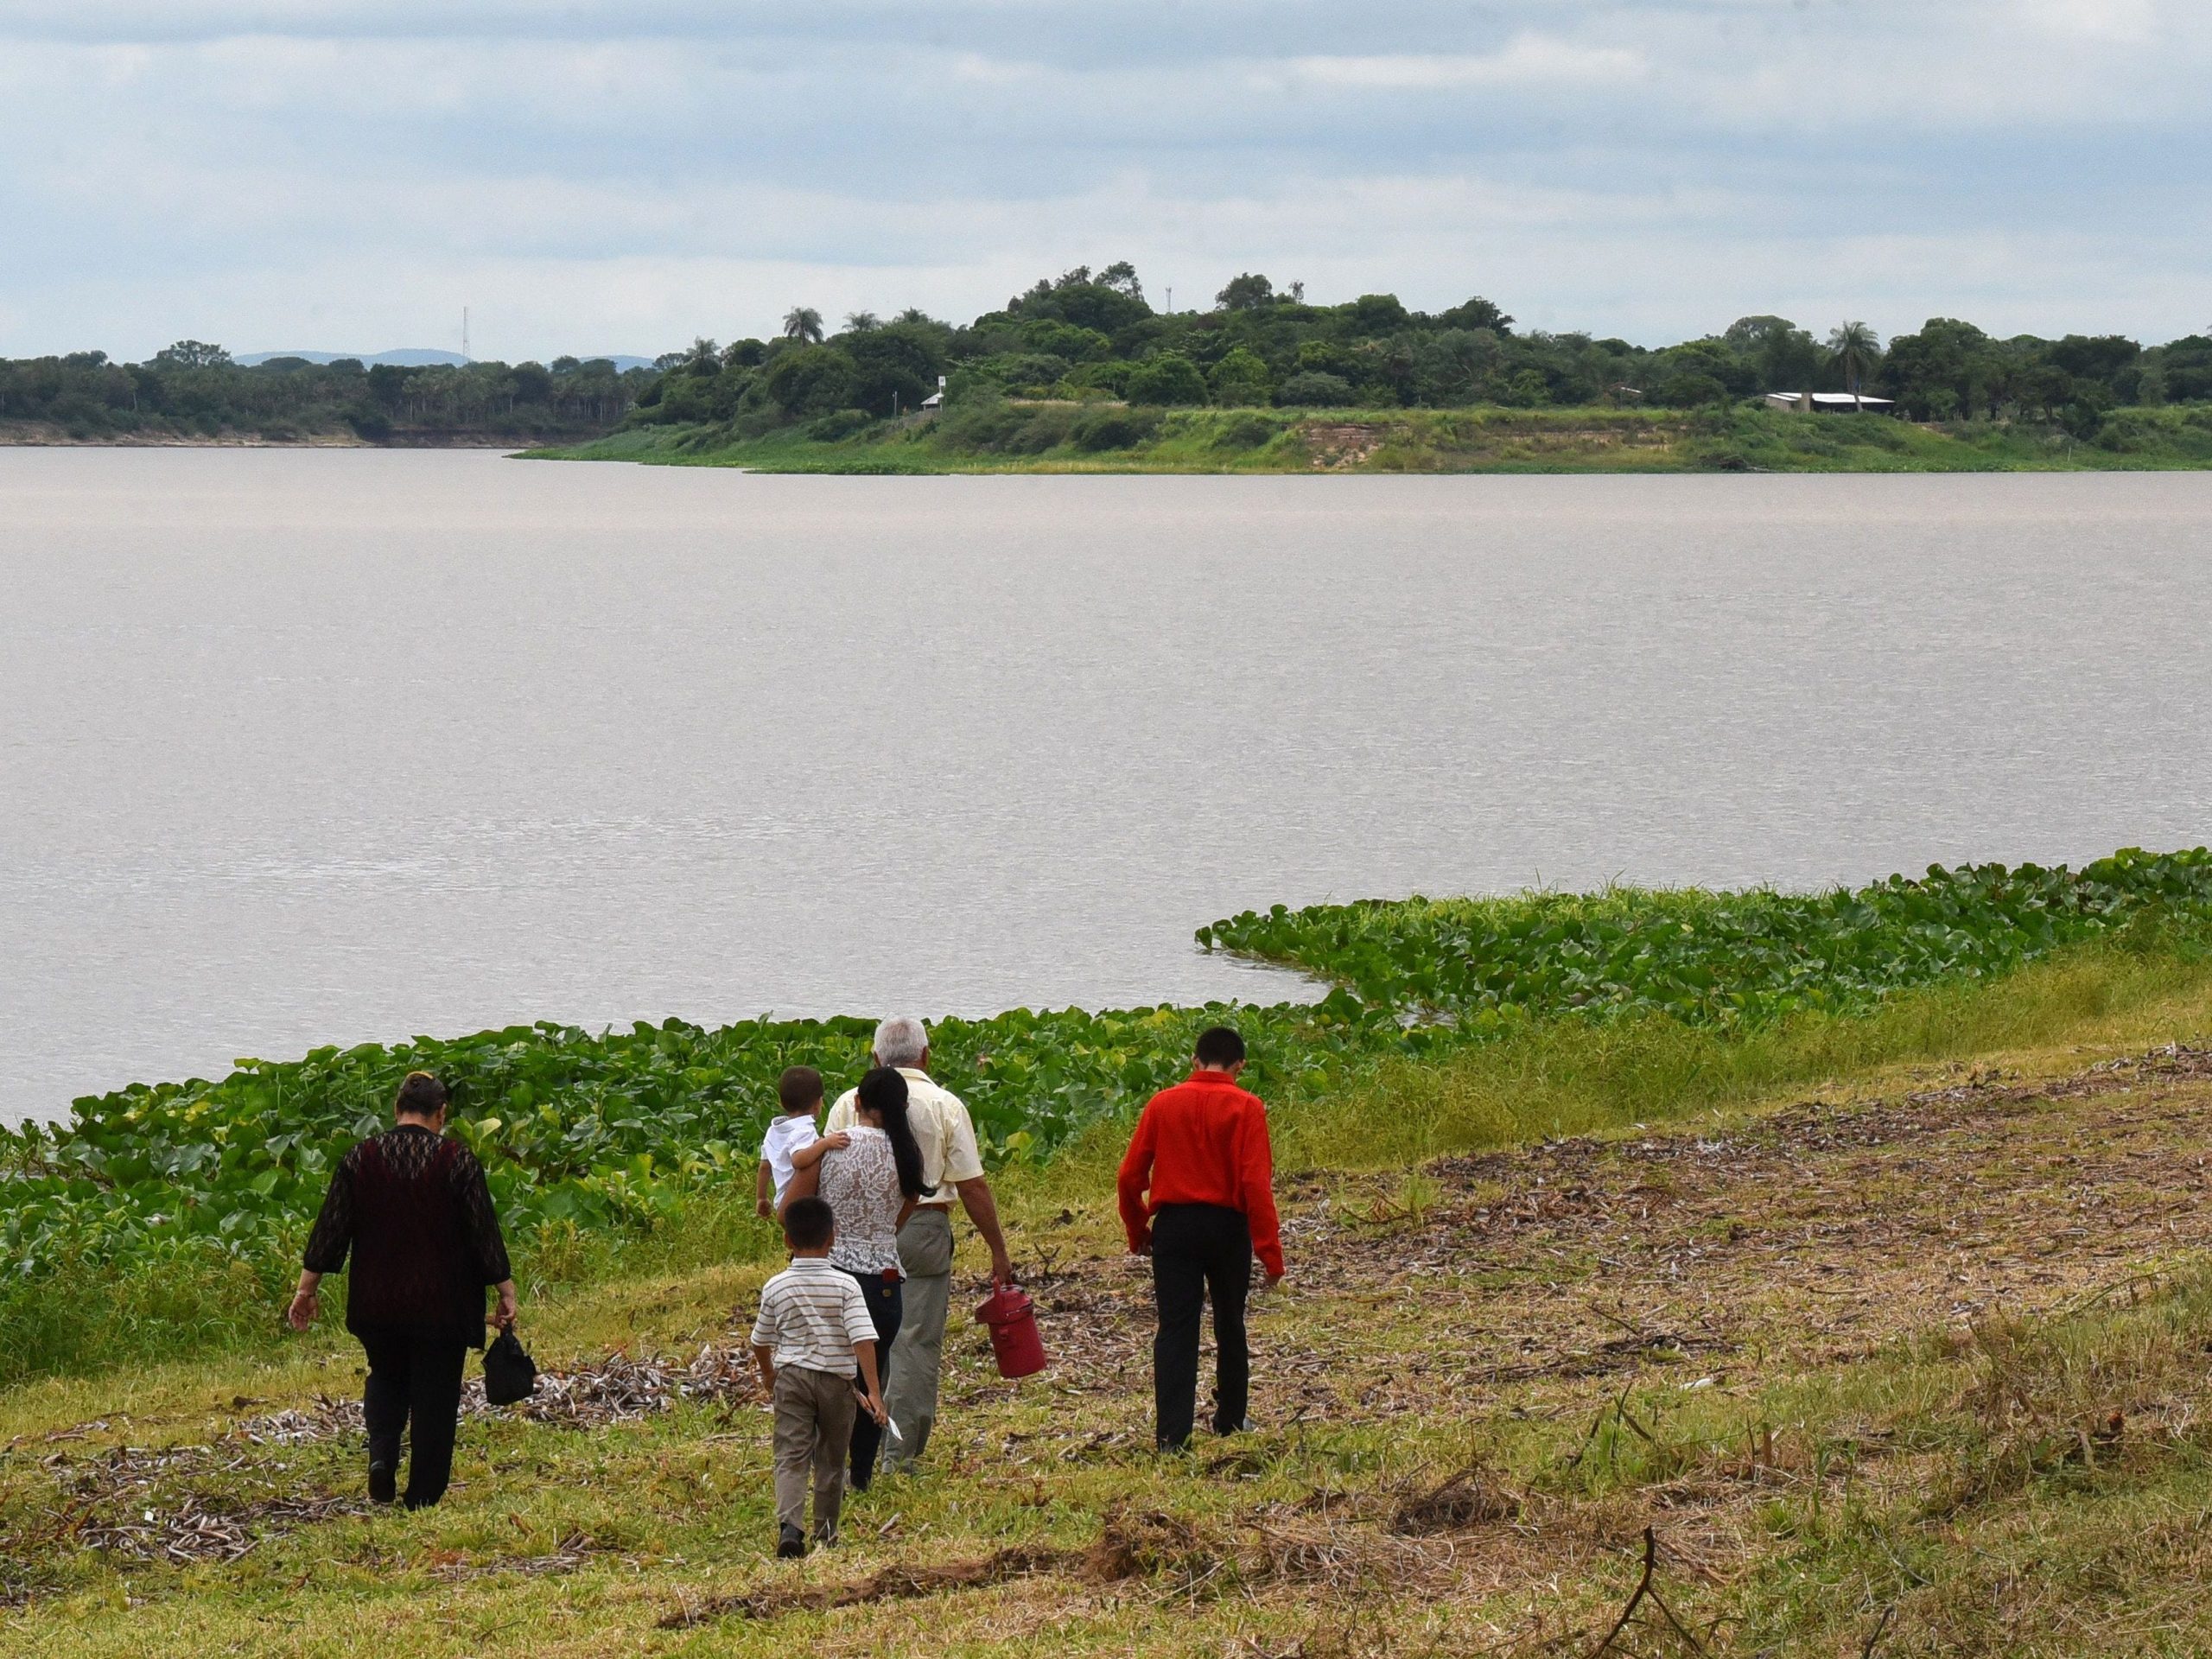 An image of the shore of Paraguay River.